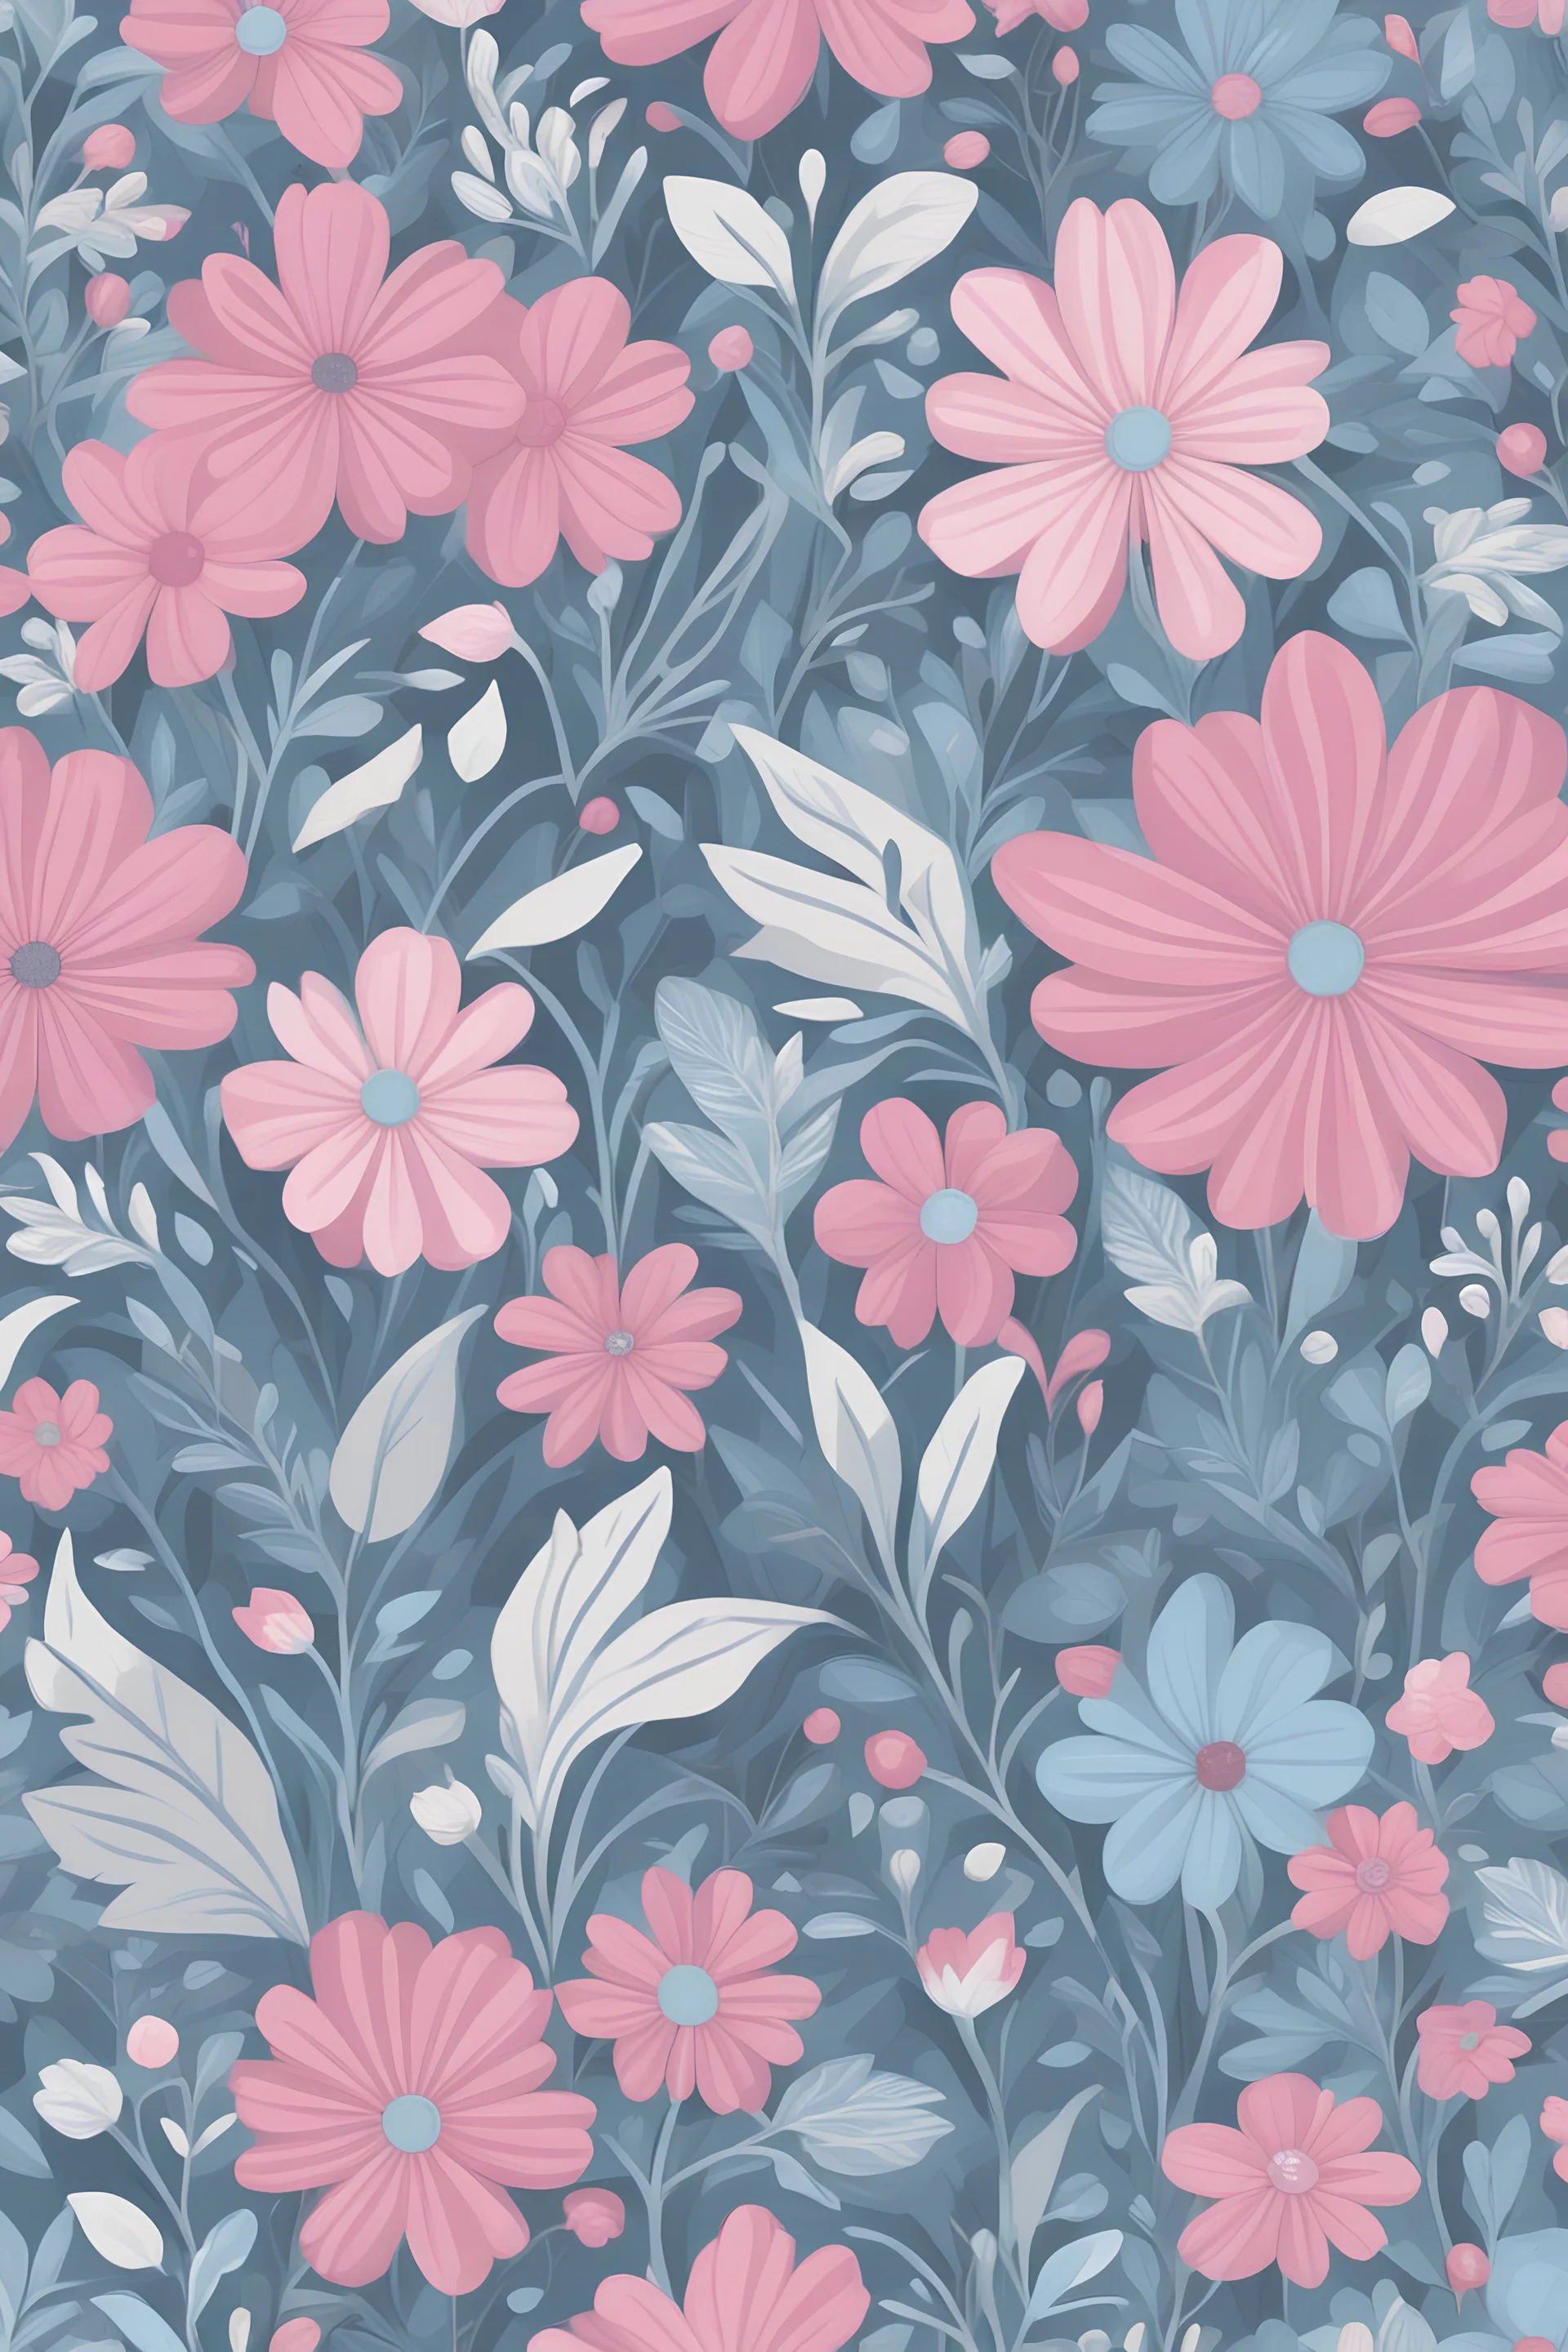 flowers and leaves in a field design pattern featuring pink, light blue and silver